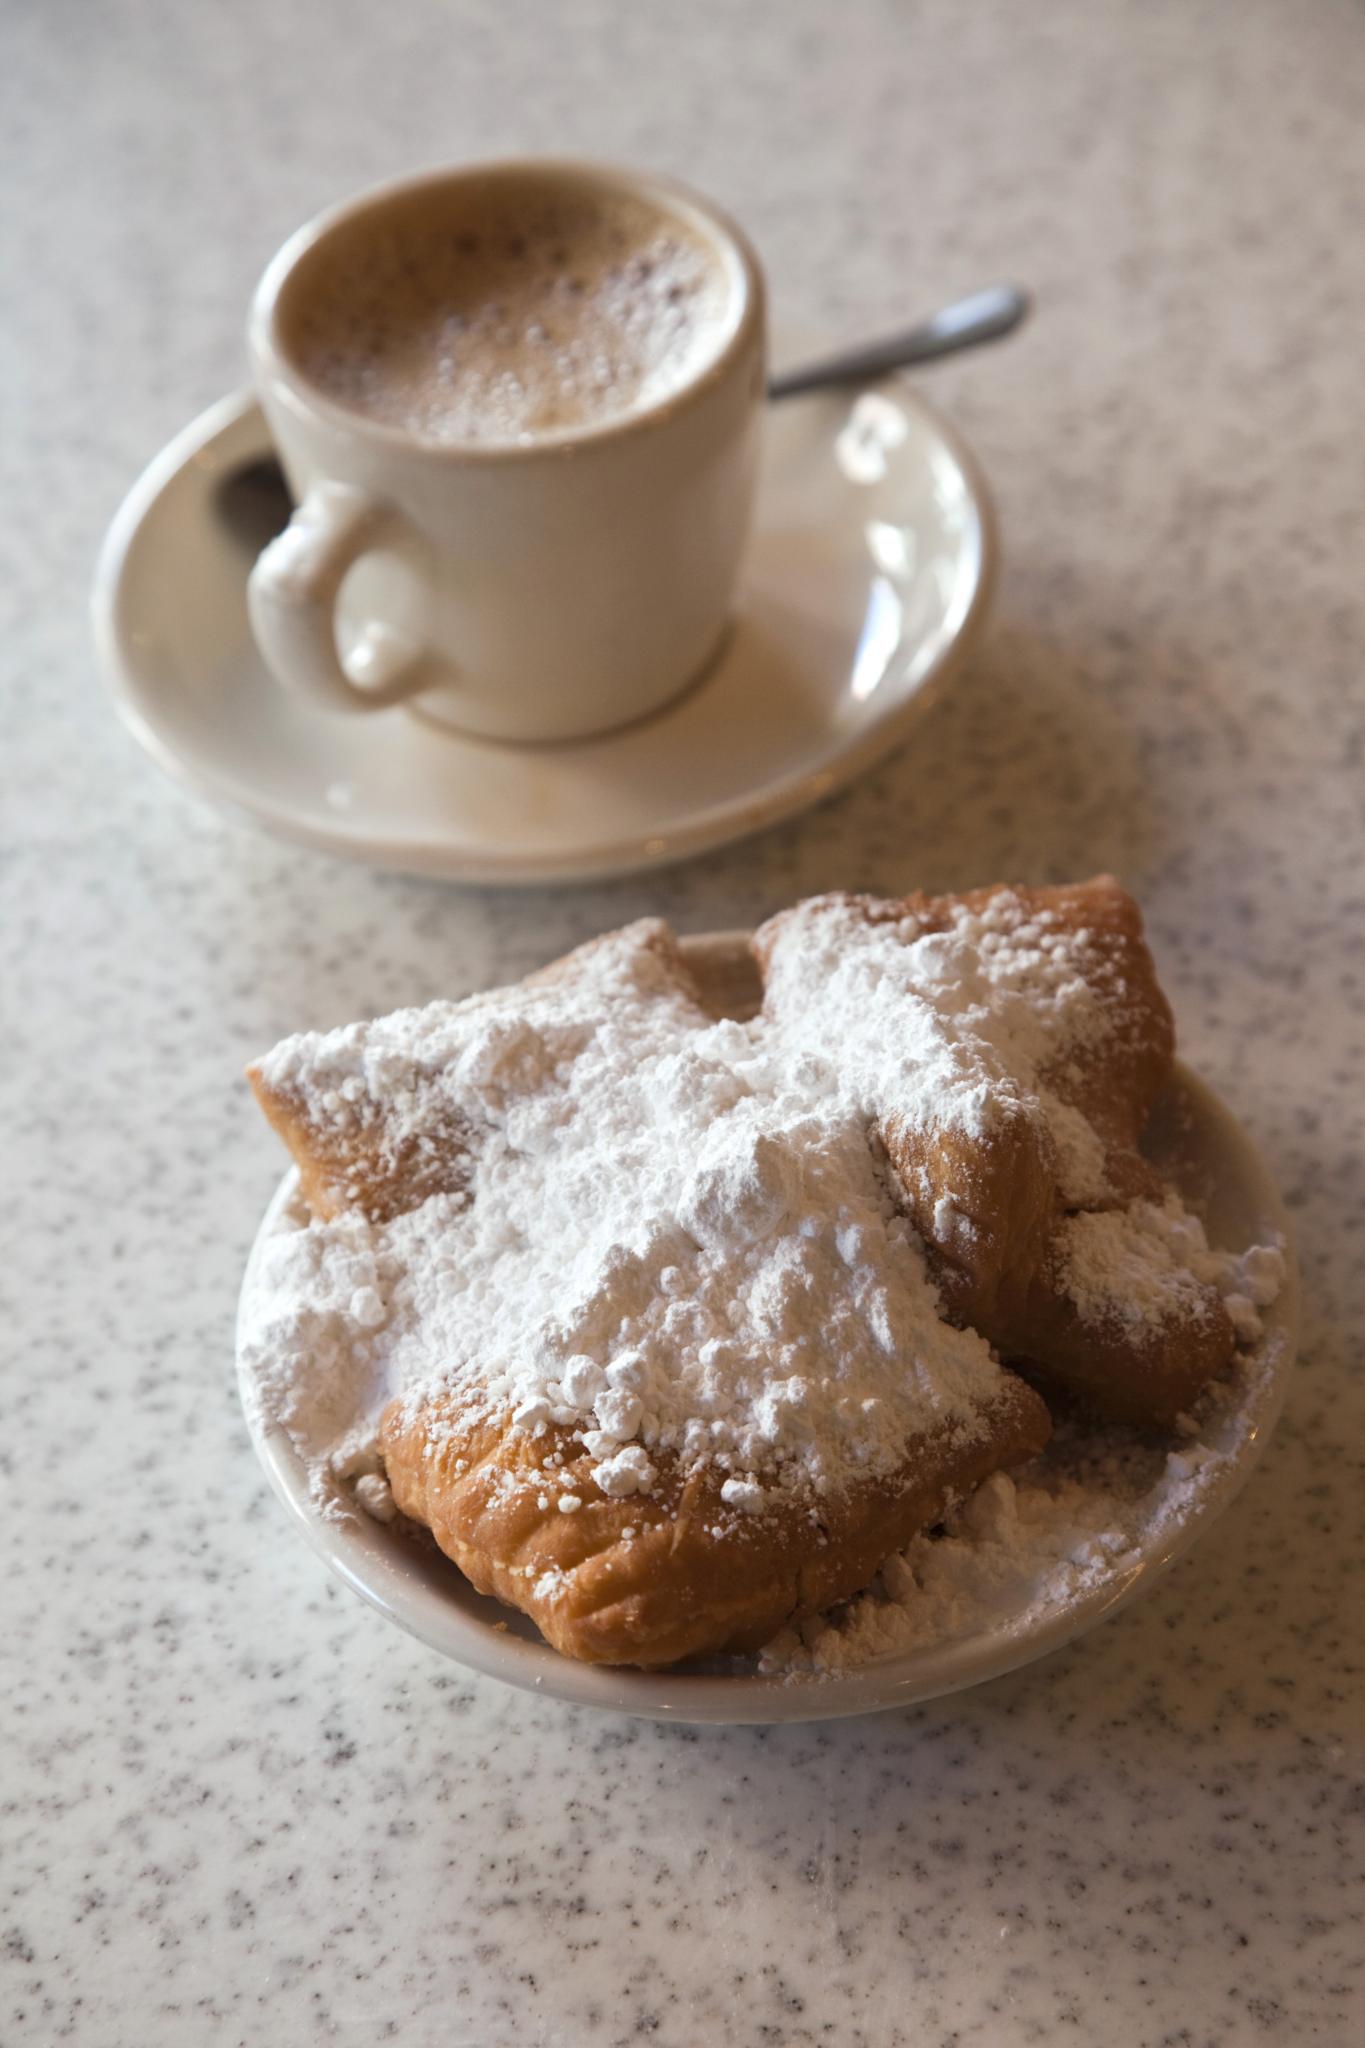 10 Foods to Experience in New Orleans